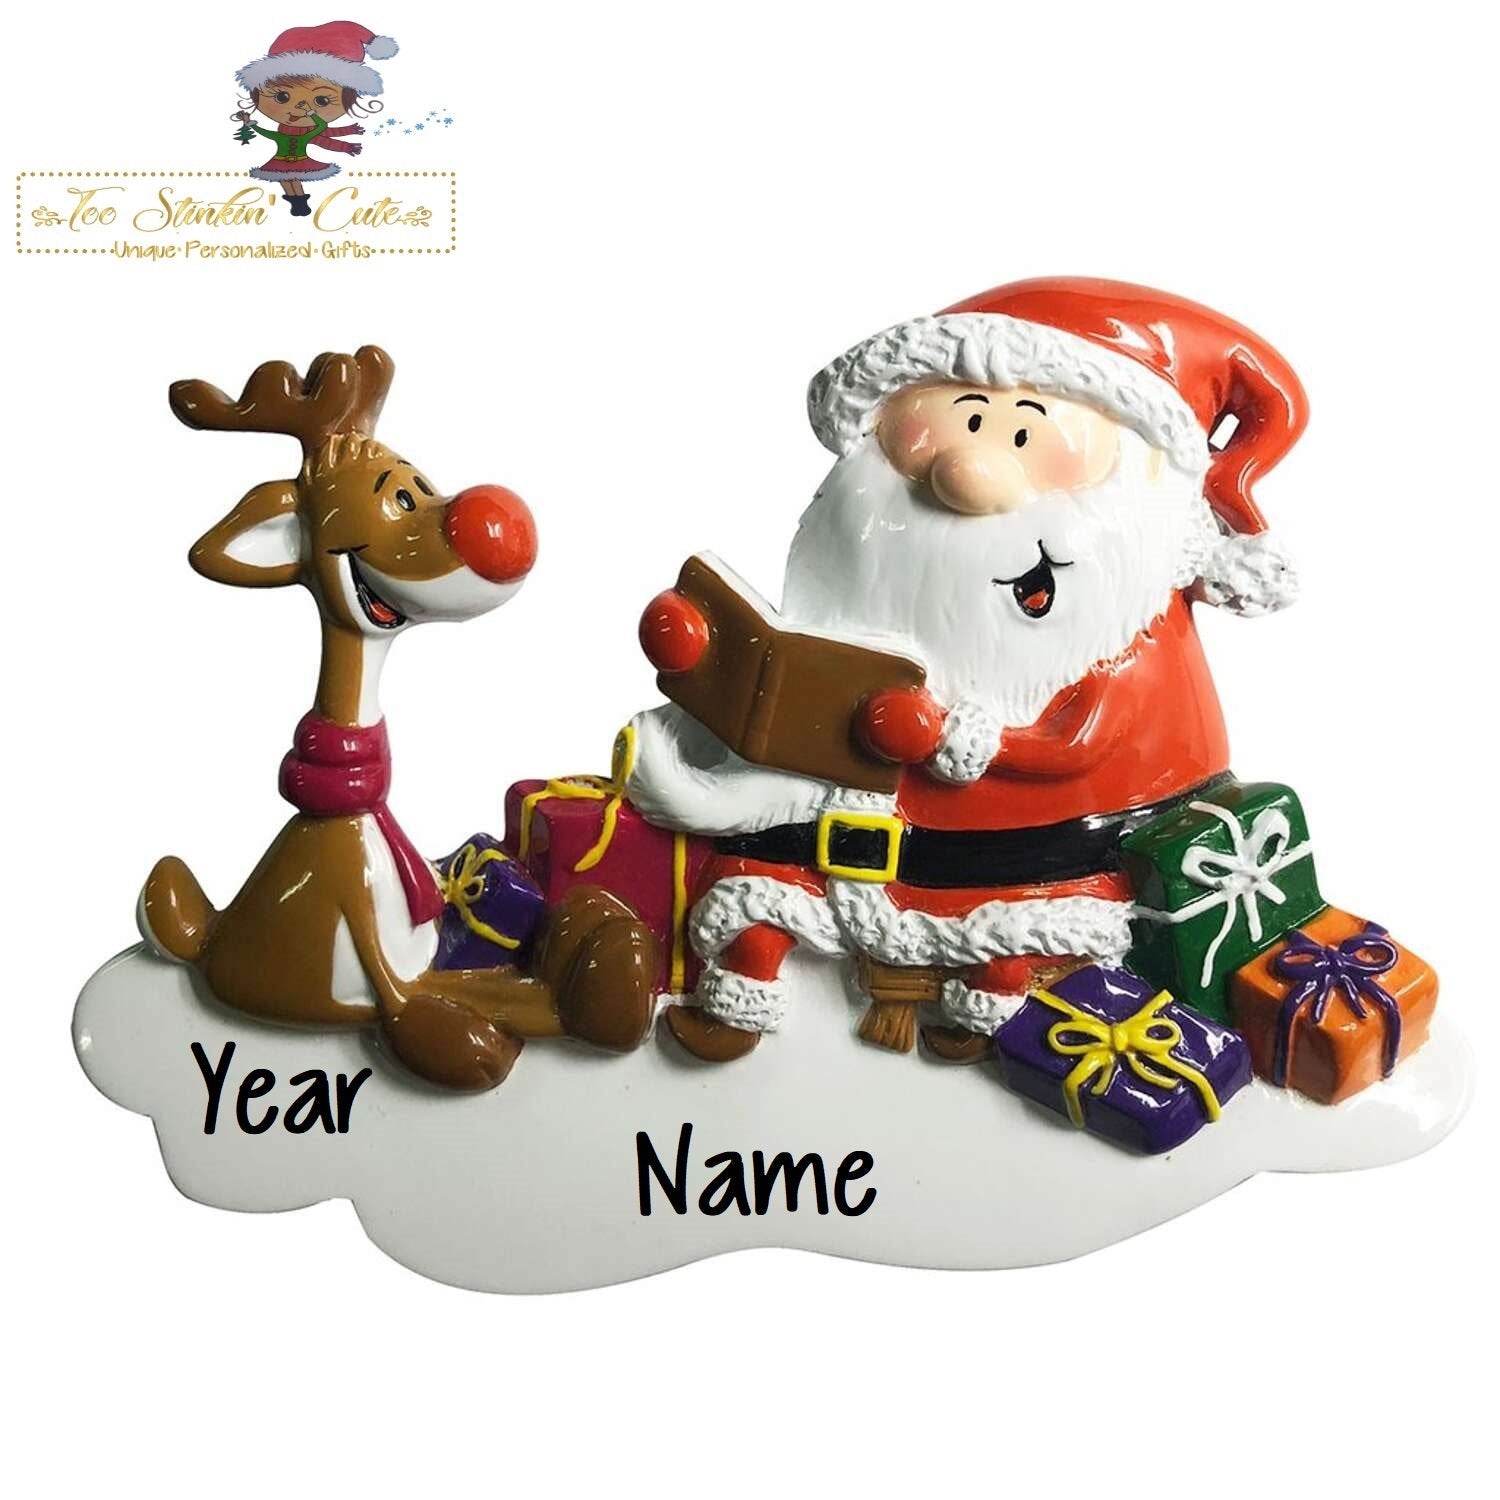 Christmas Ornament Santa Claus with Rudolph Reindeer/Children Kids Single Individual- Personalized + Free Shipping!